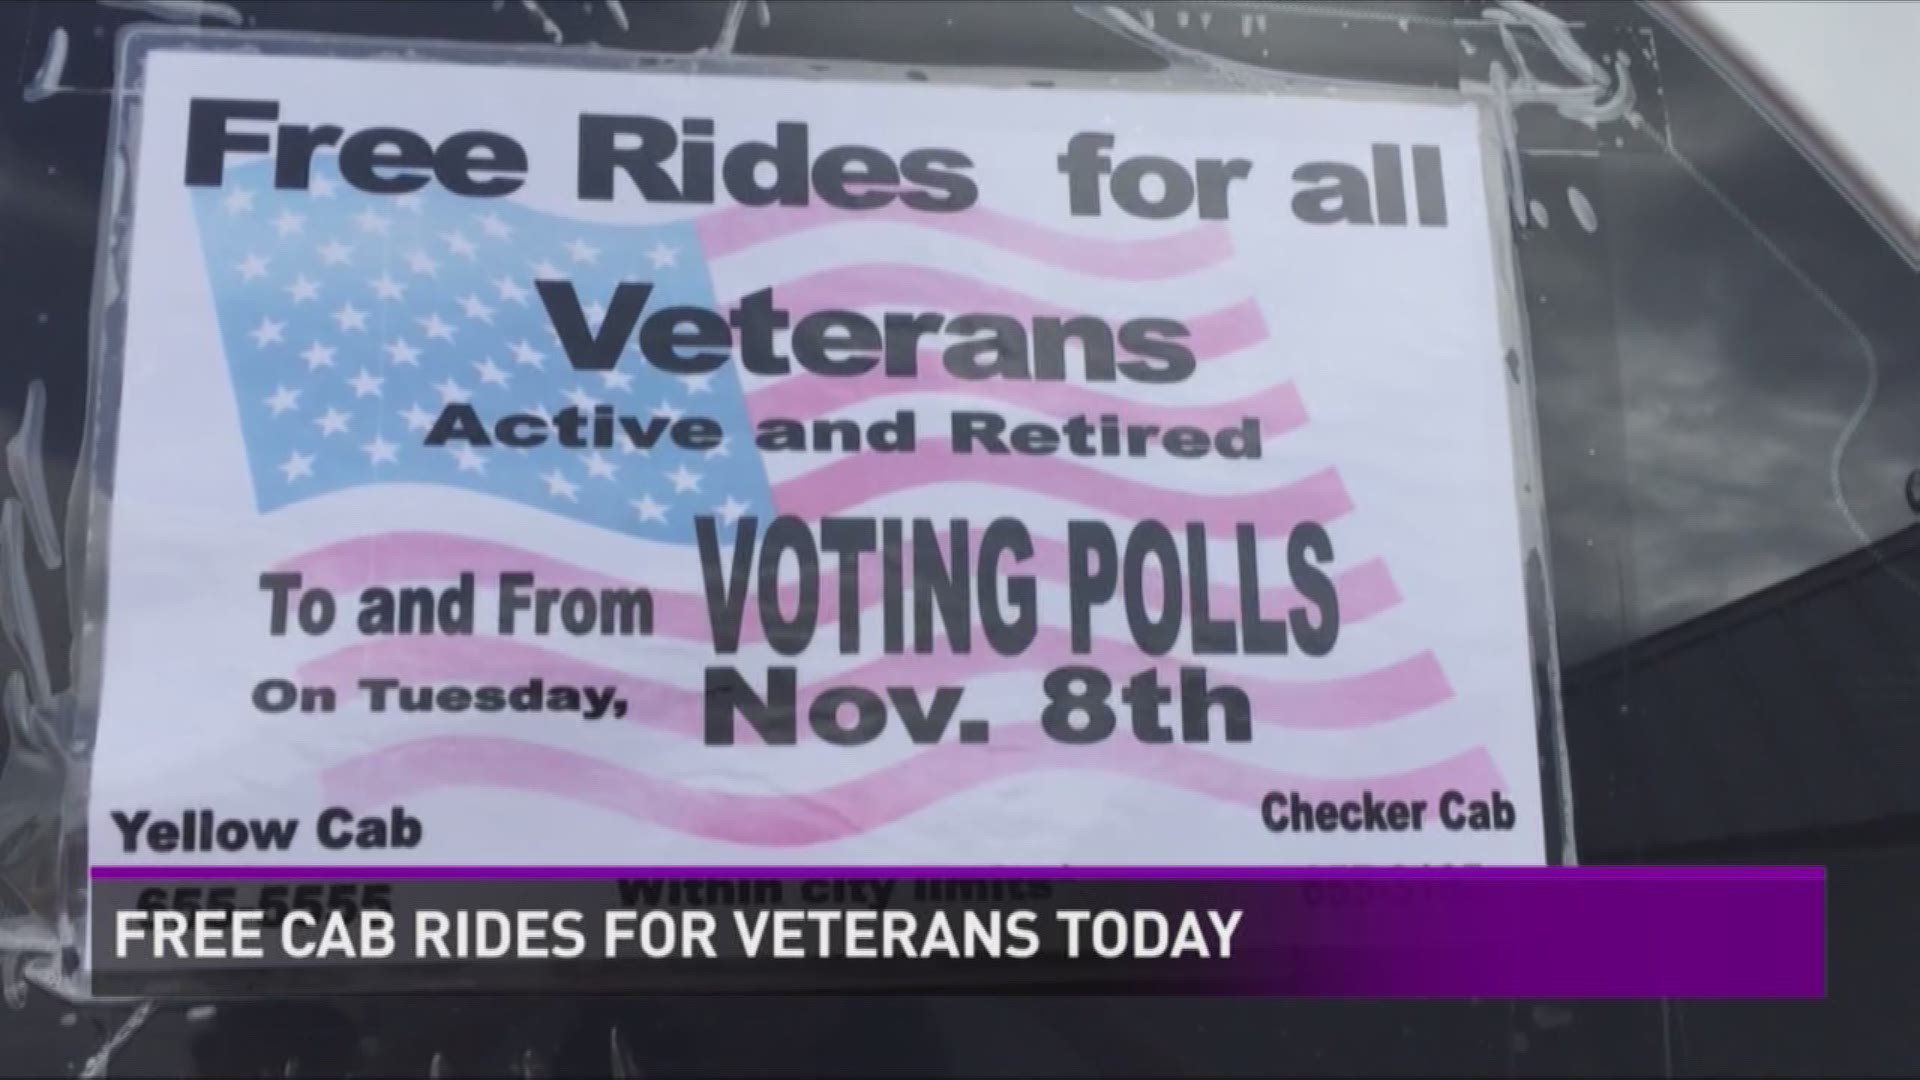 One local cab company offered warriors a ride to the polls today.